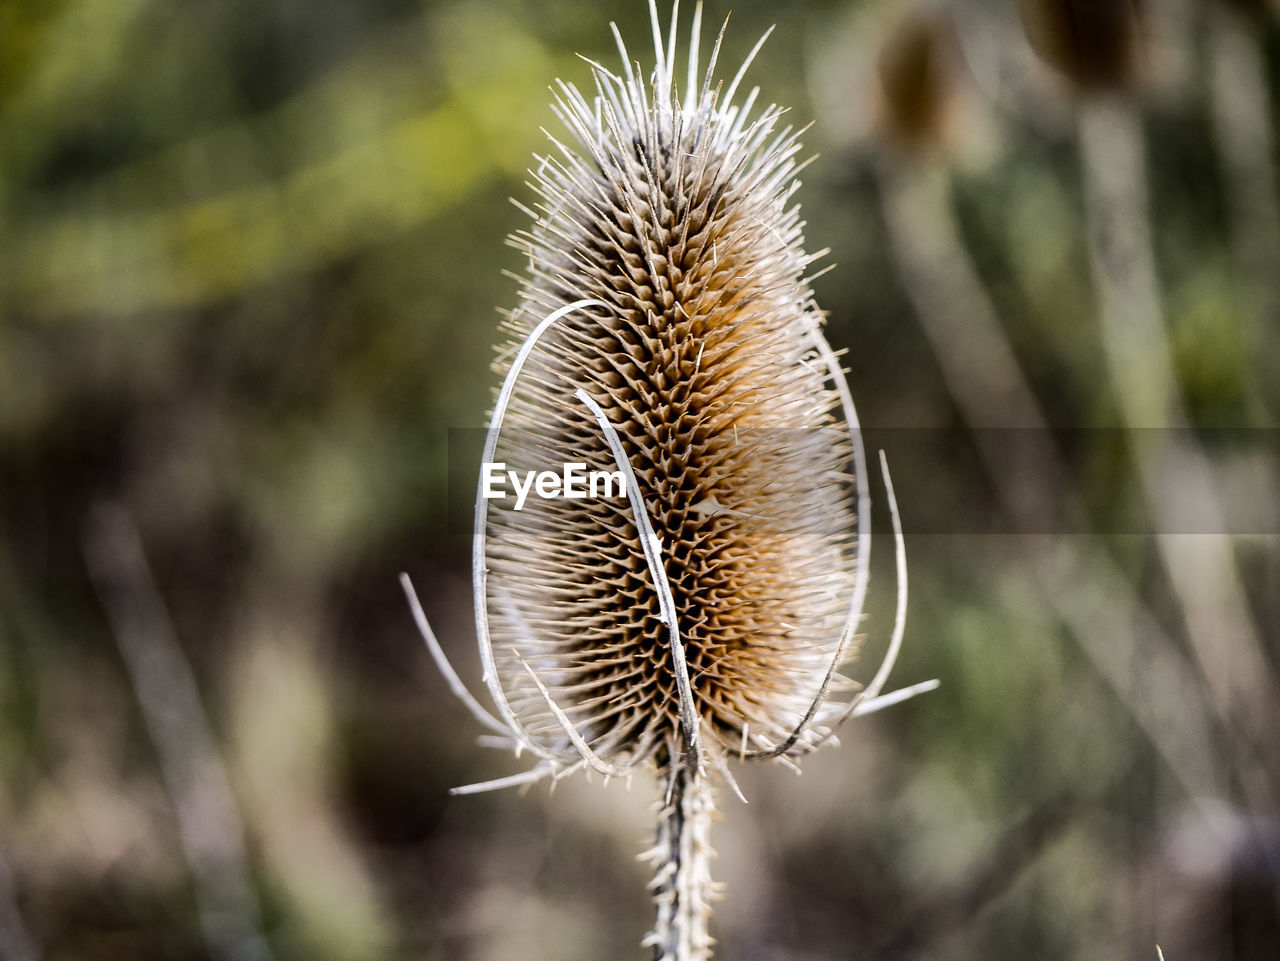 CLOSE-UP OF DRIED THISTLE PLANT